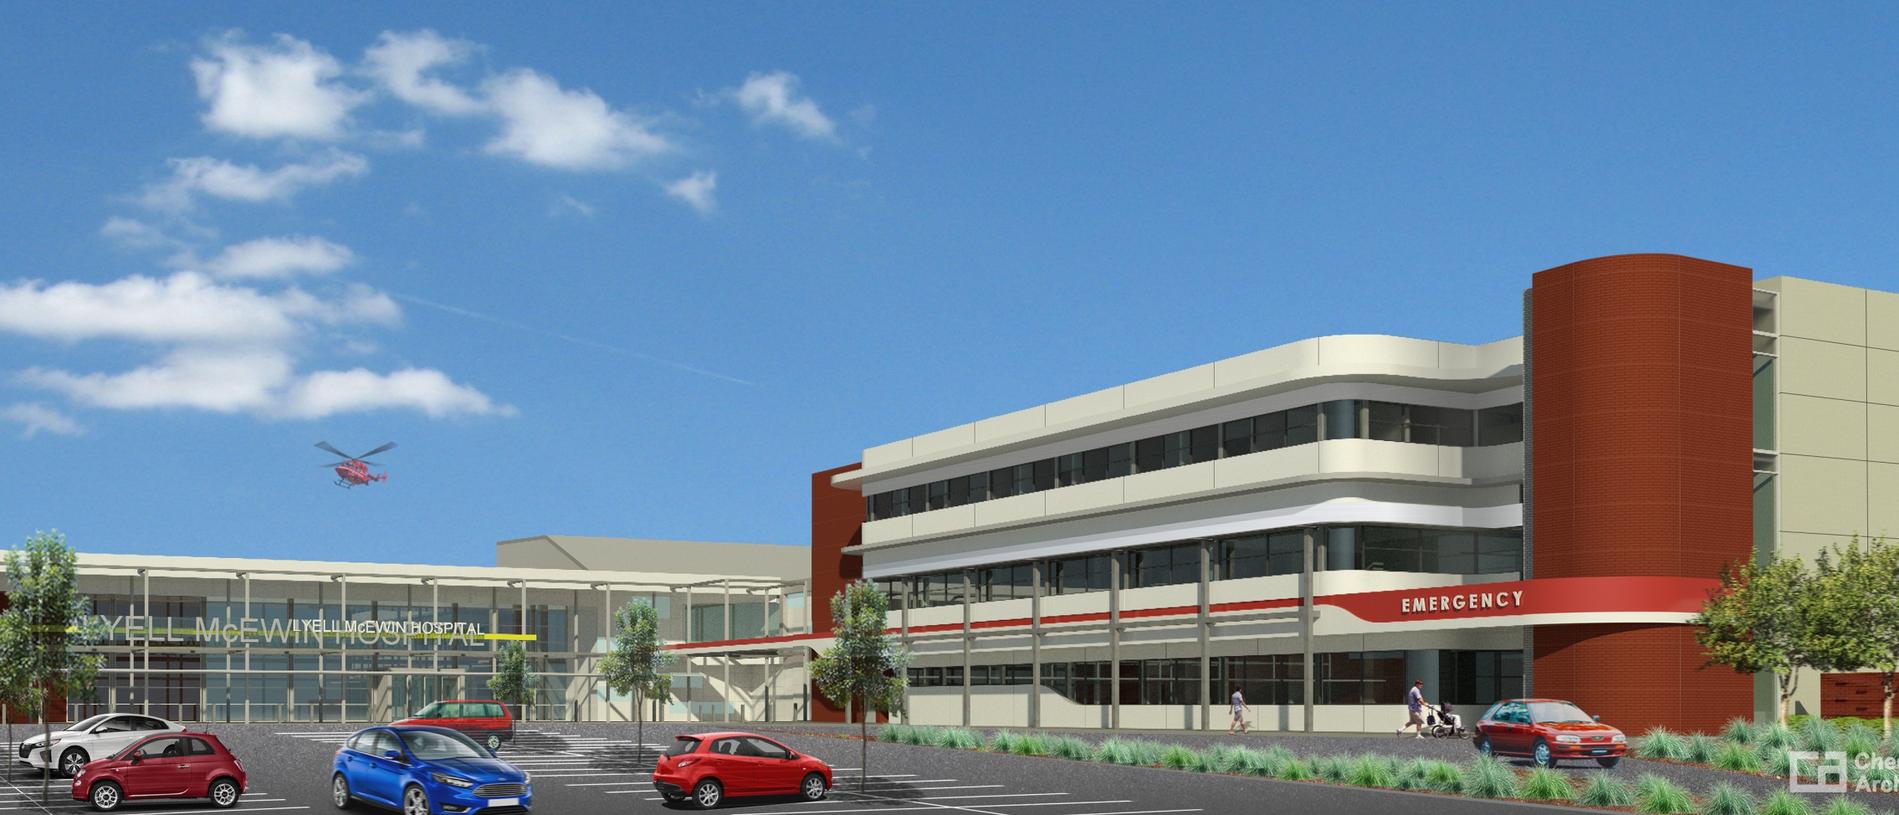 Lyell McEwin Hospital Plans lodged for extension The